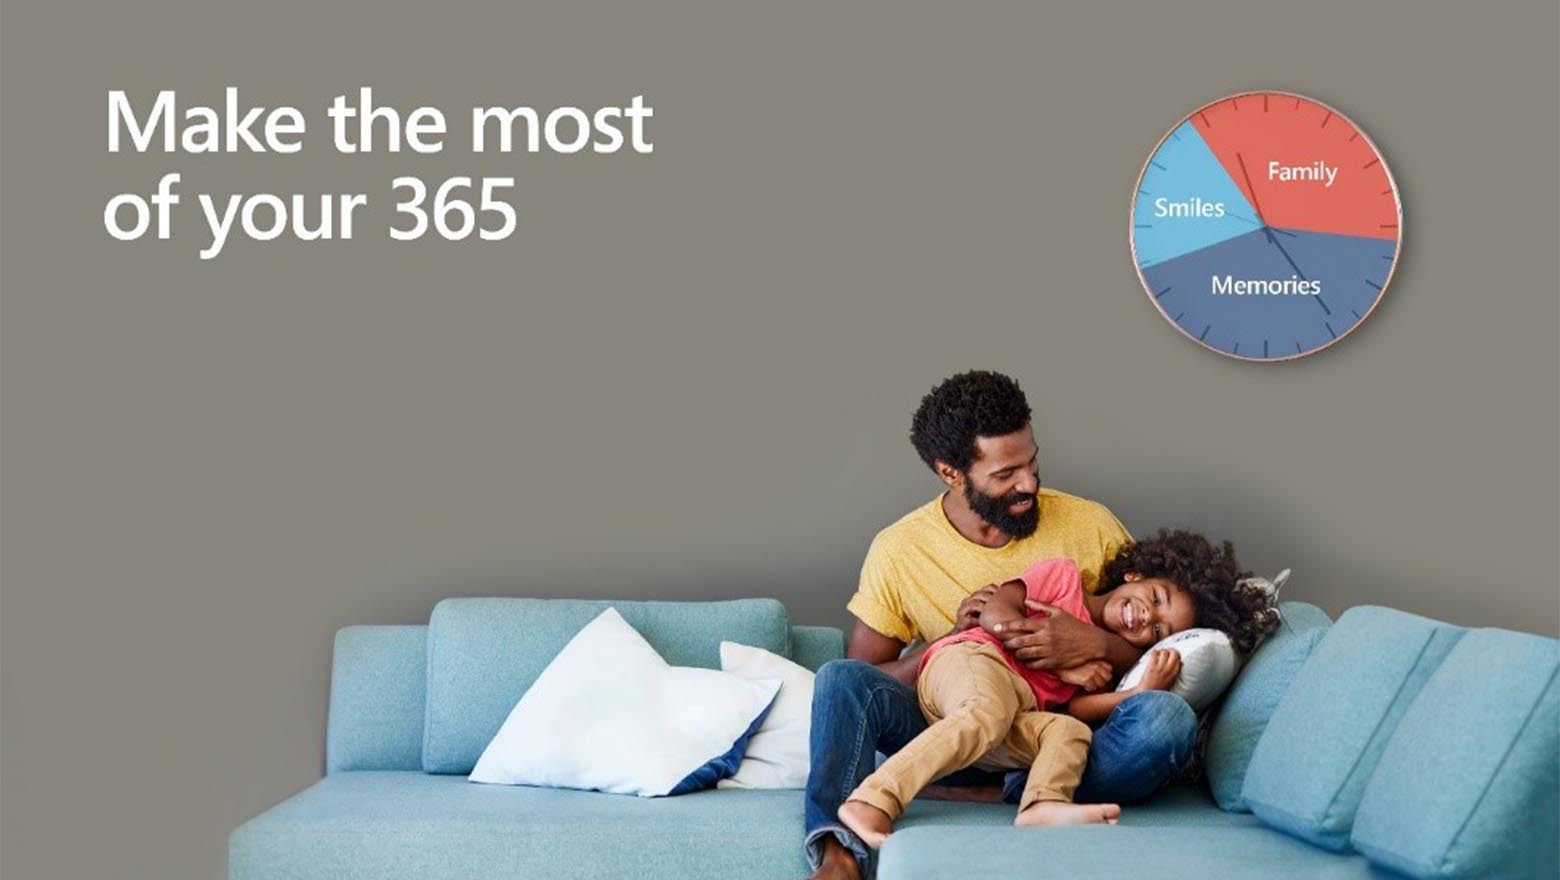 Working remotely? Check out new Microsoft 365 personal and family subscriptions